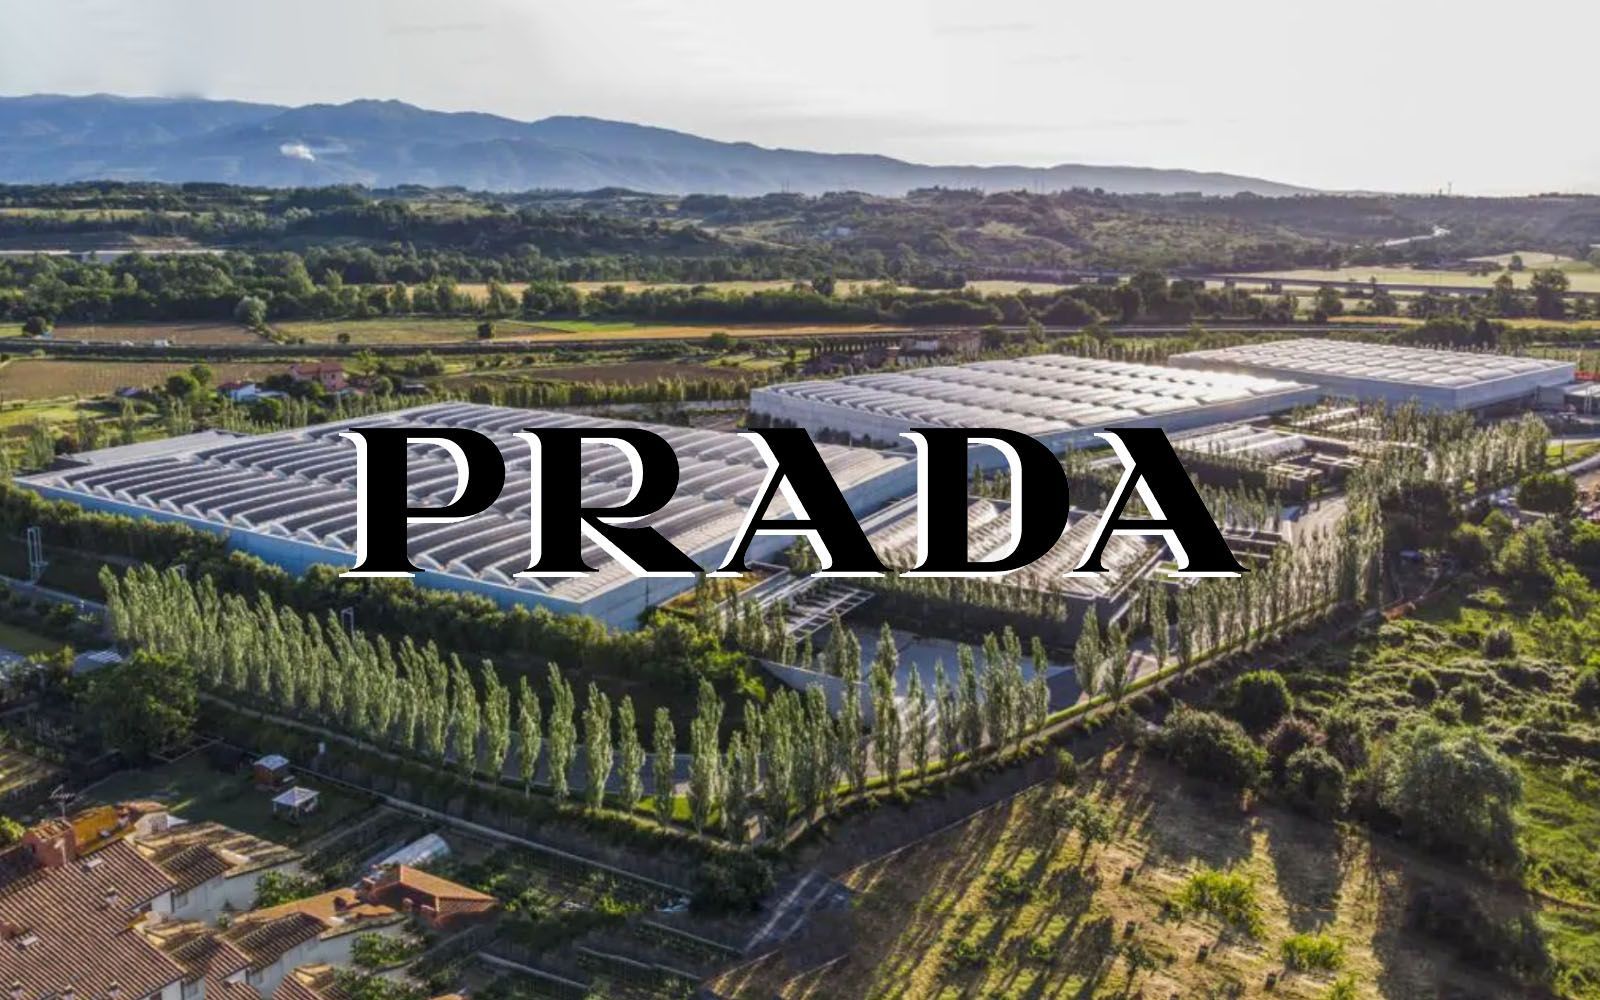 Prada has built a giant sustainable logistics center in Tuscany